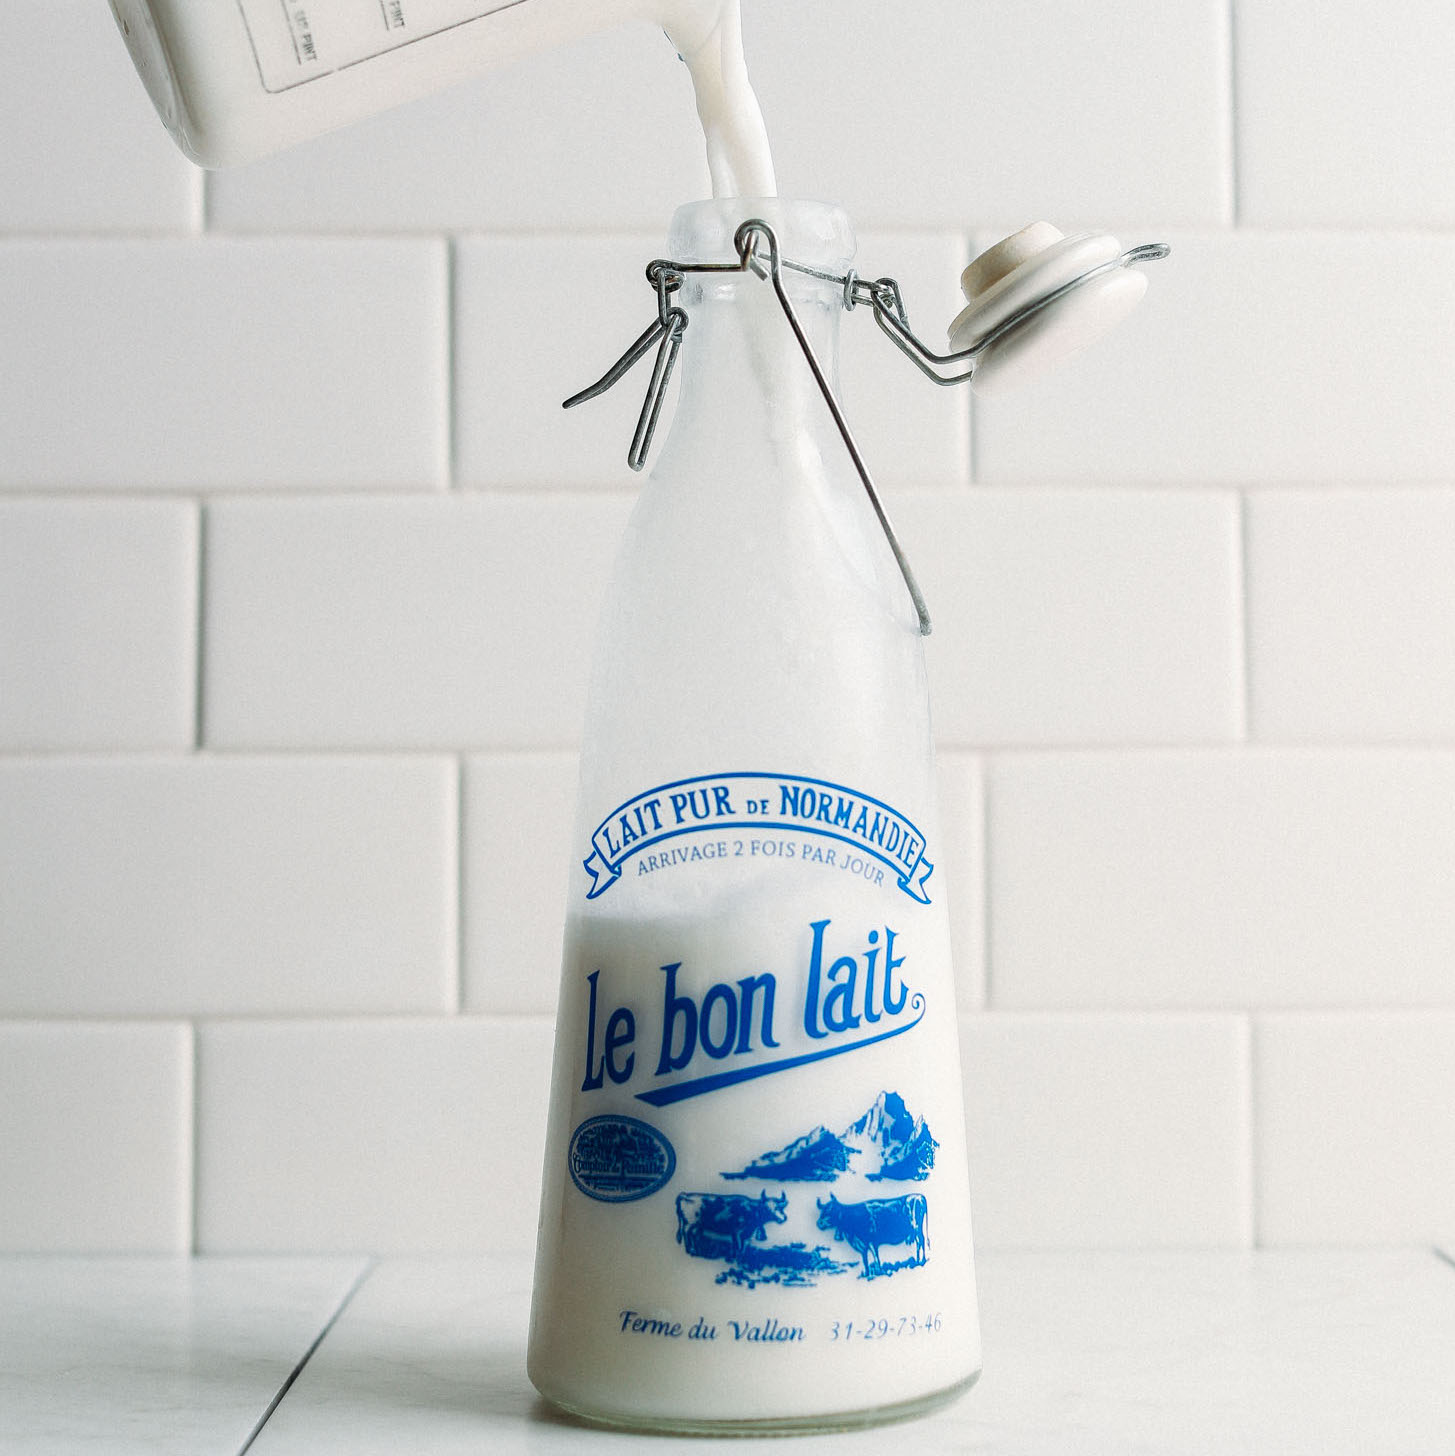 Pouring homemade coconut milk into an old-fashioned milk jug